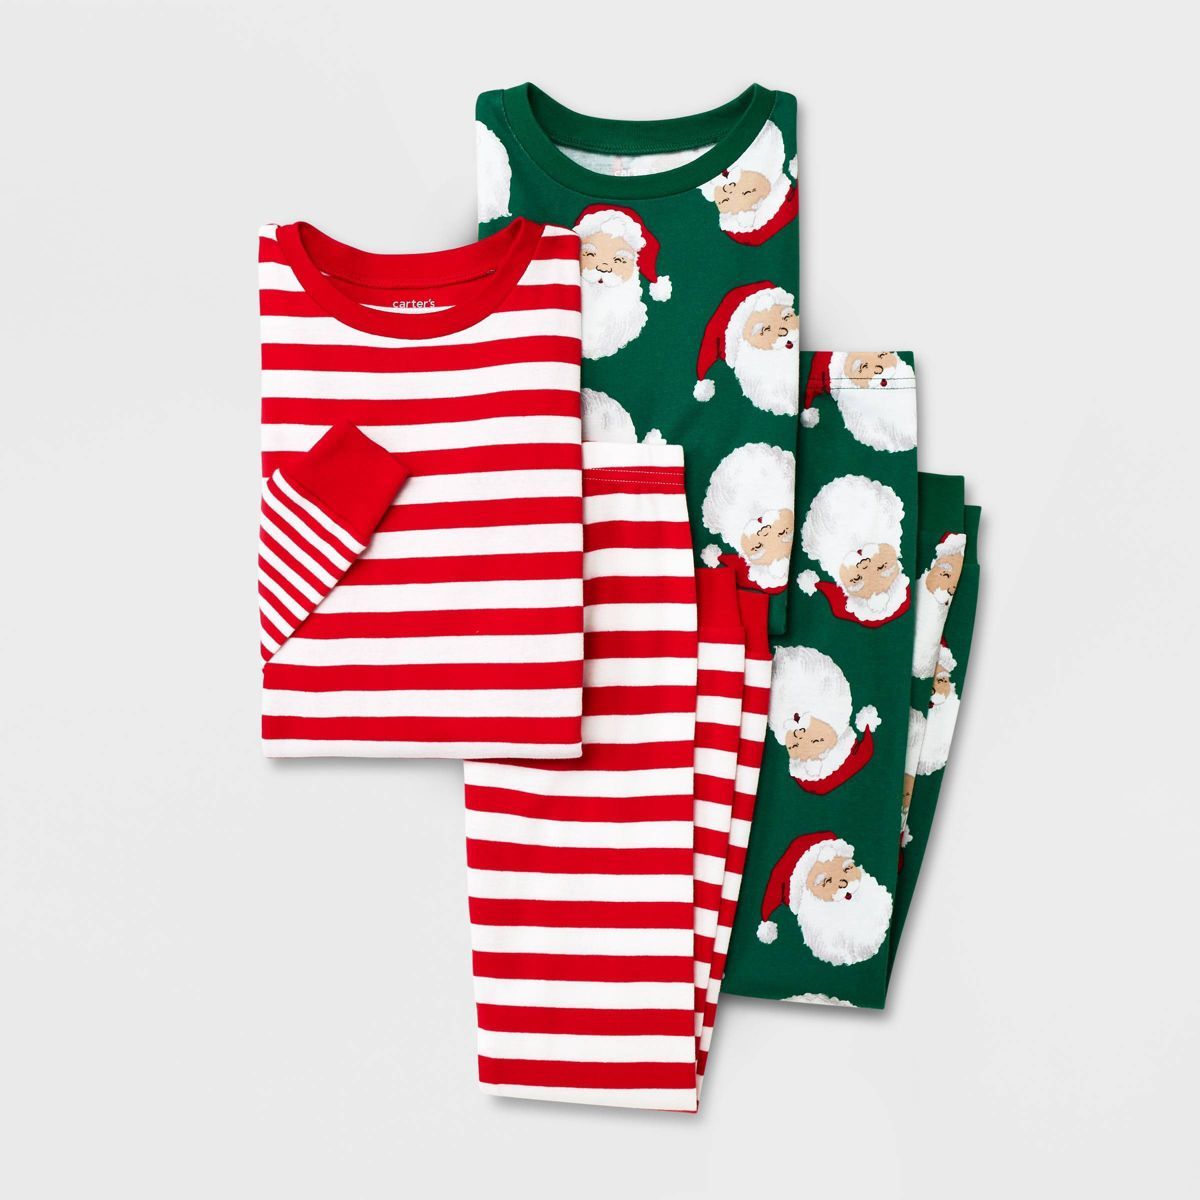 Carter's Just One You® Boys' 4pc Pajama Set - Red/Green 8 | Target